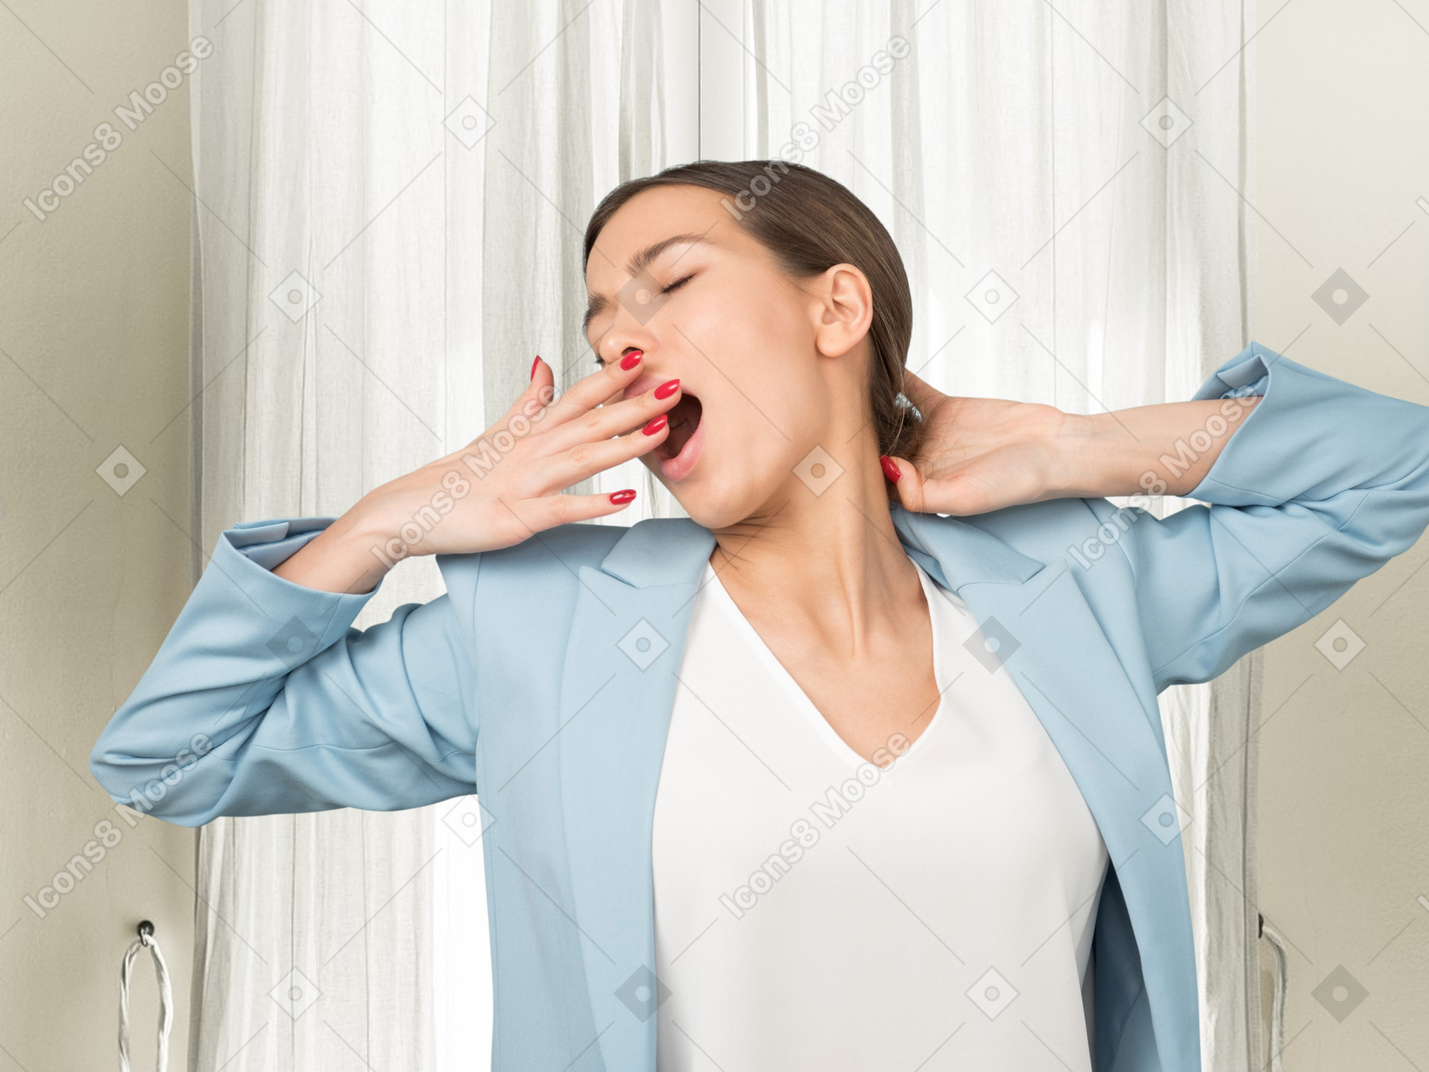 A woman in suit yawning